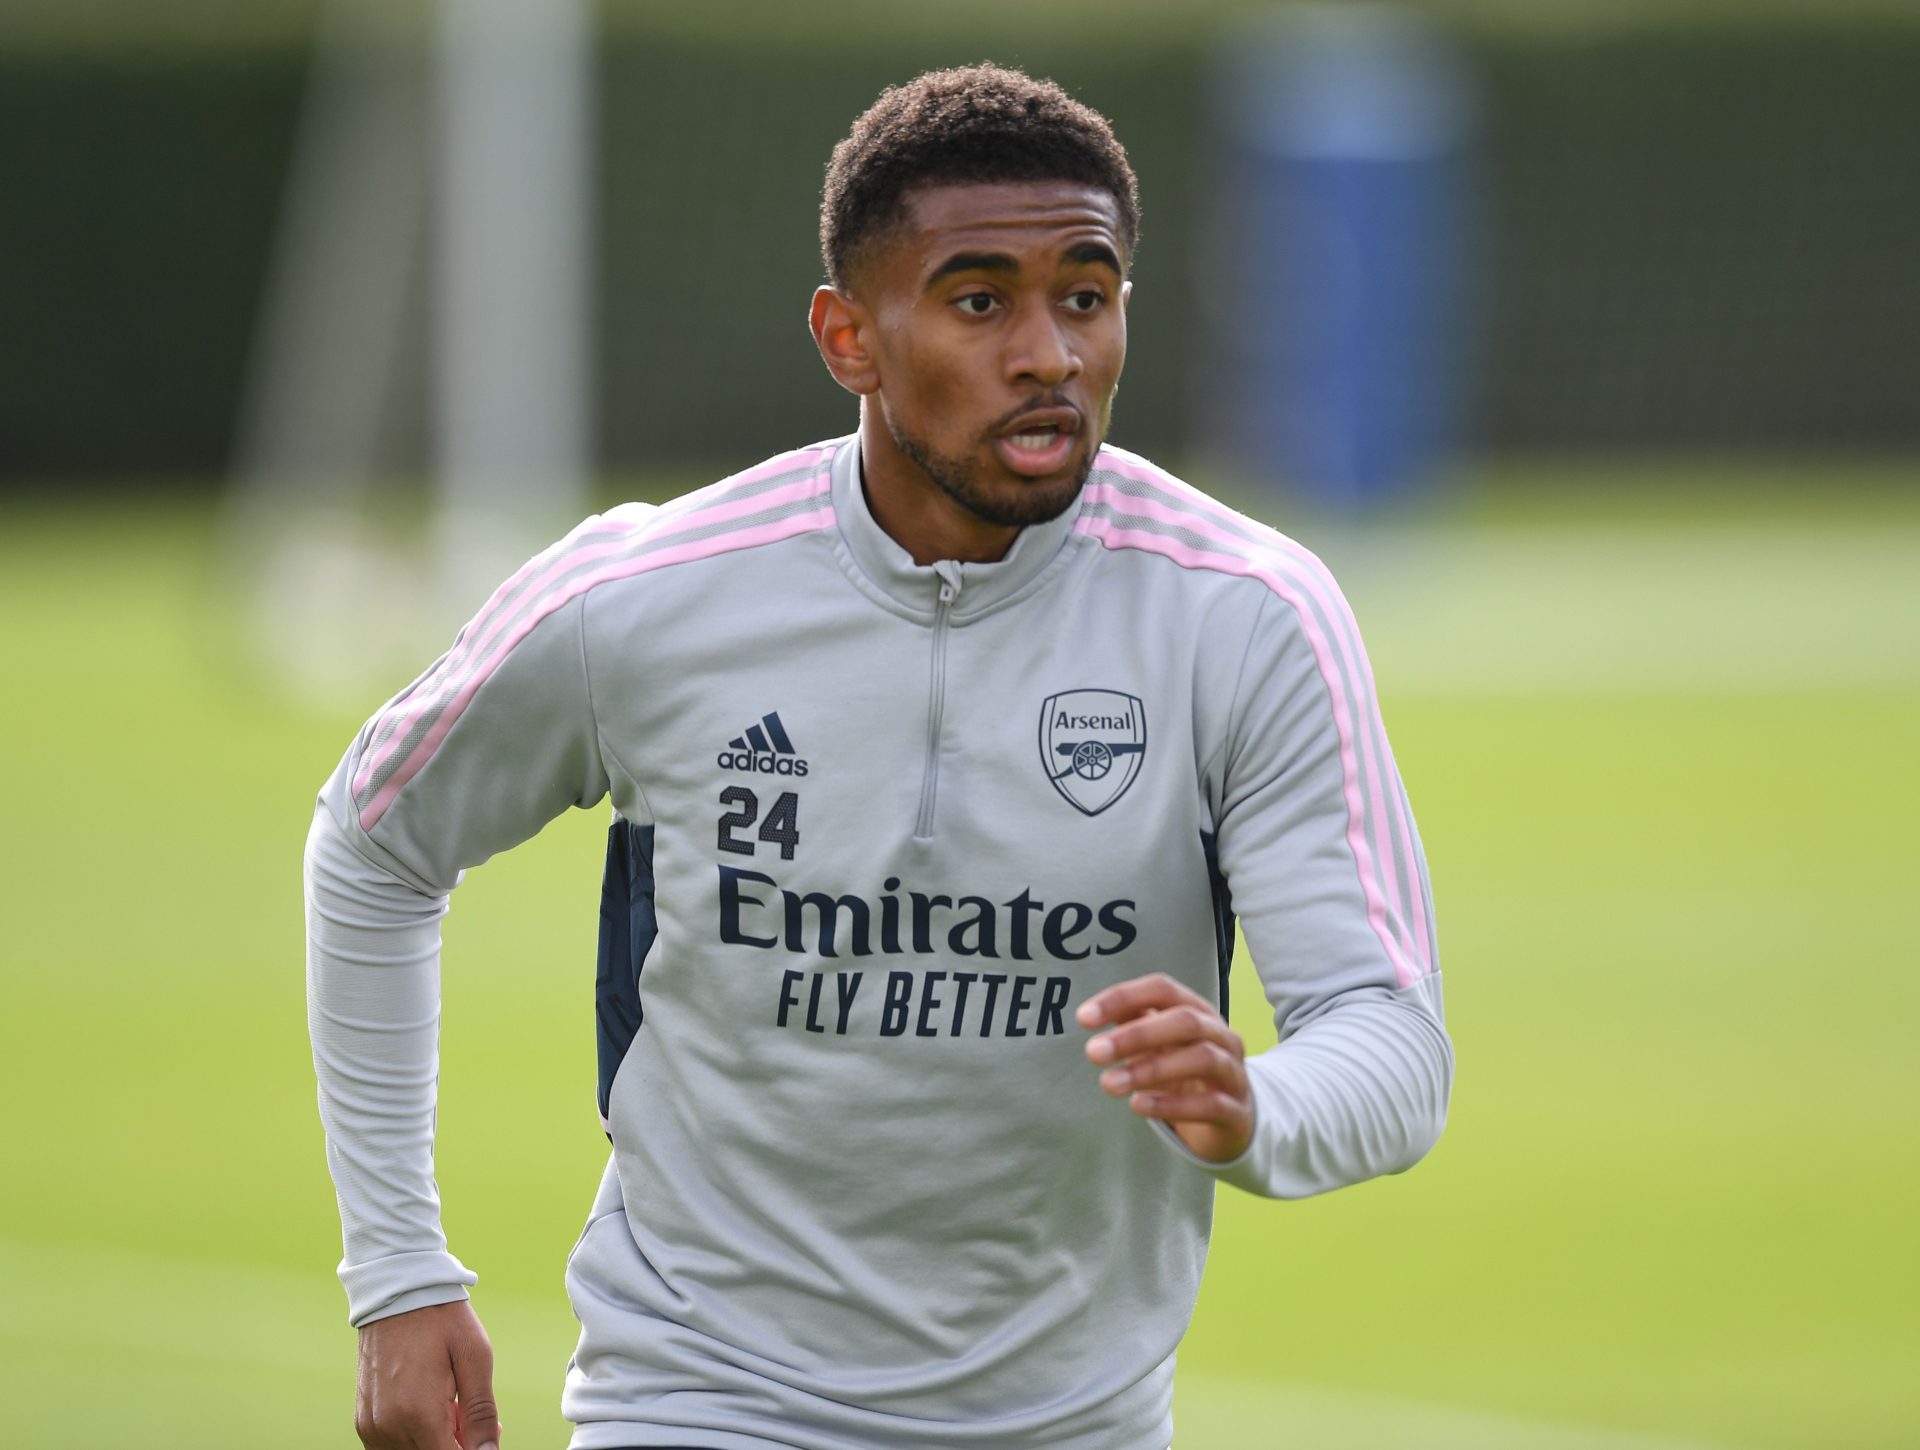 Reiss Nelson is special